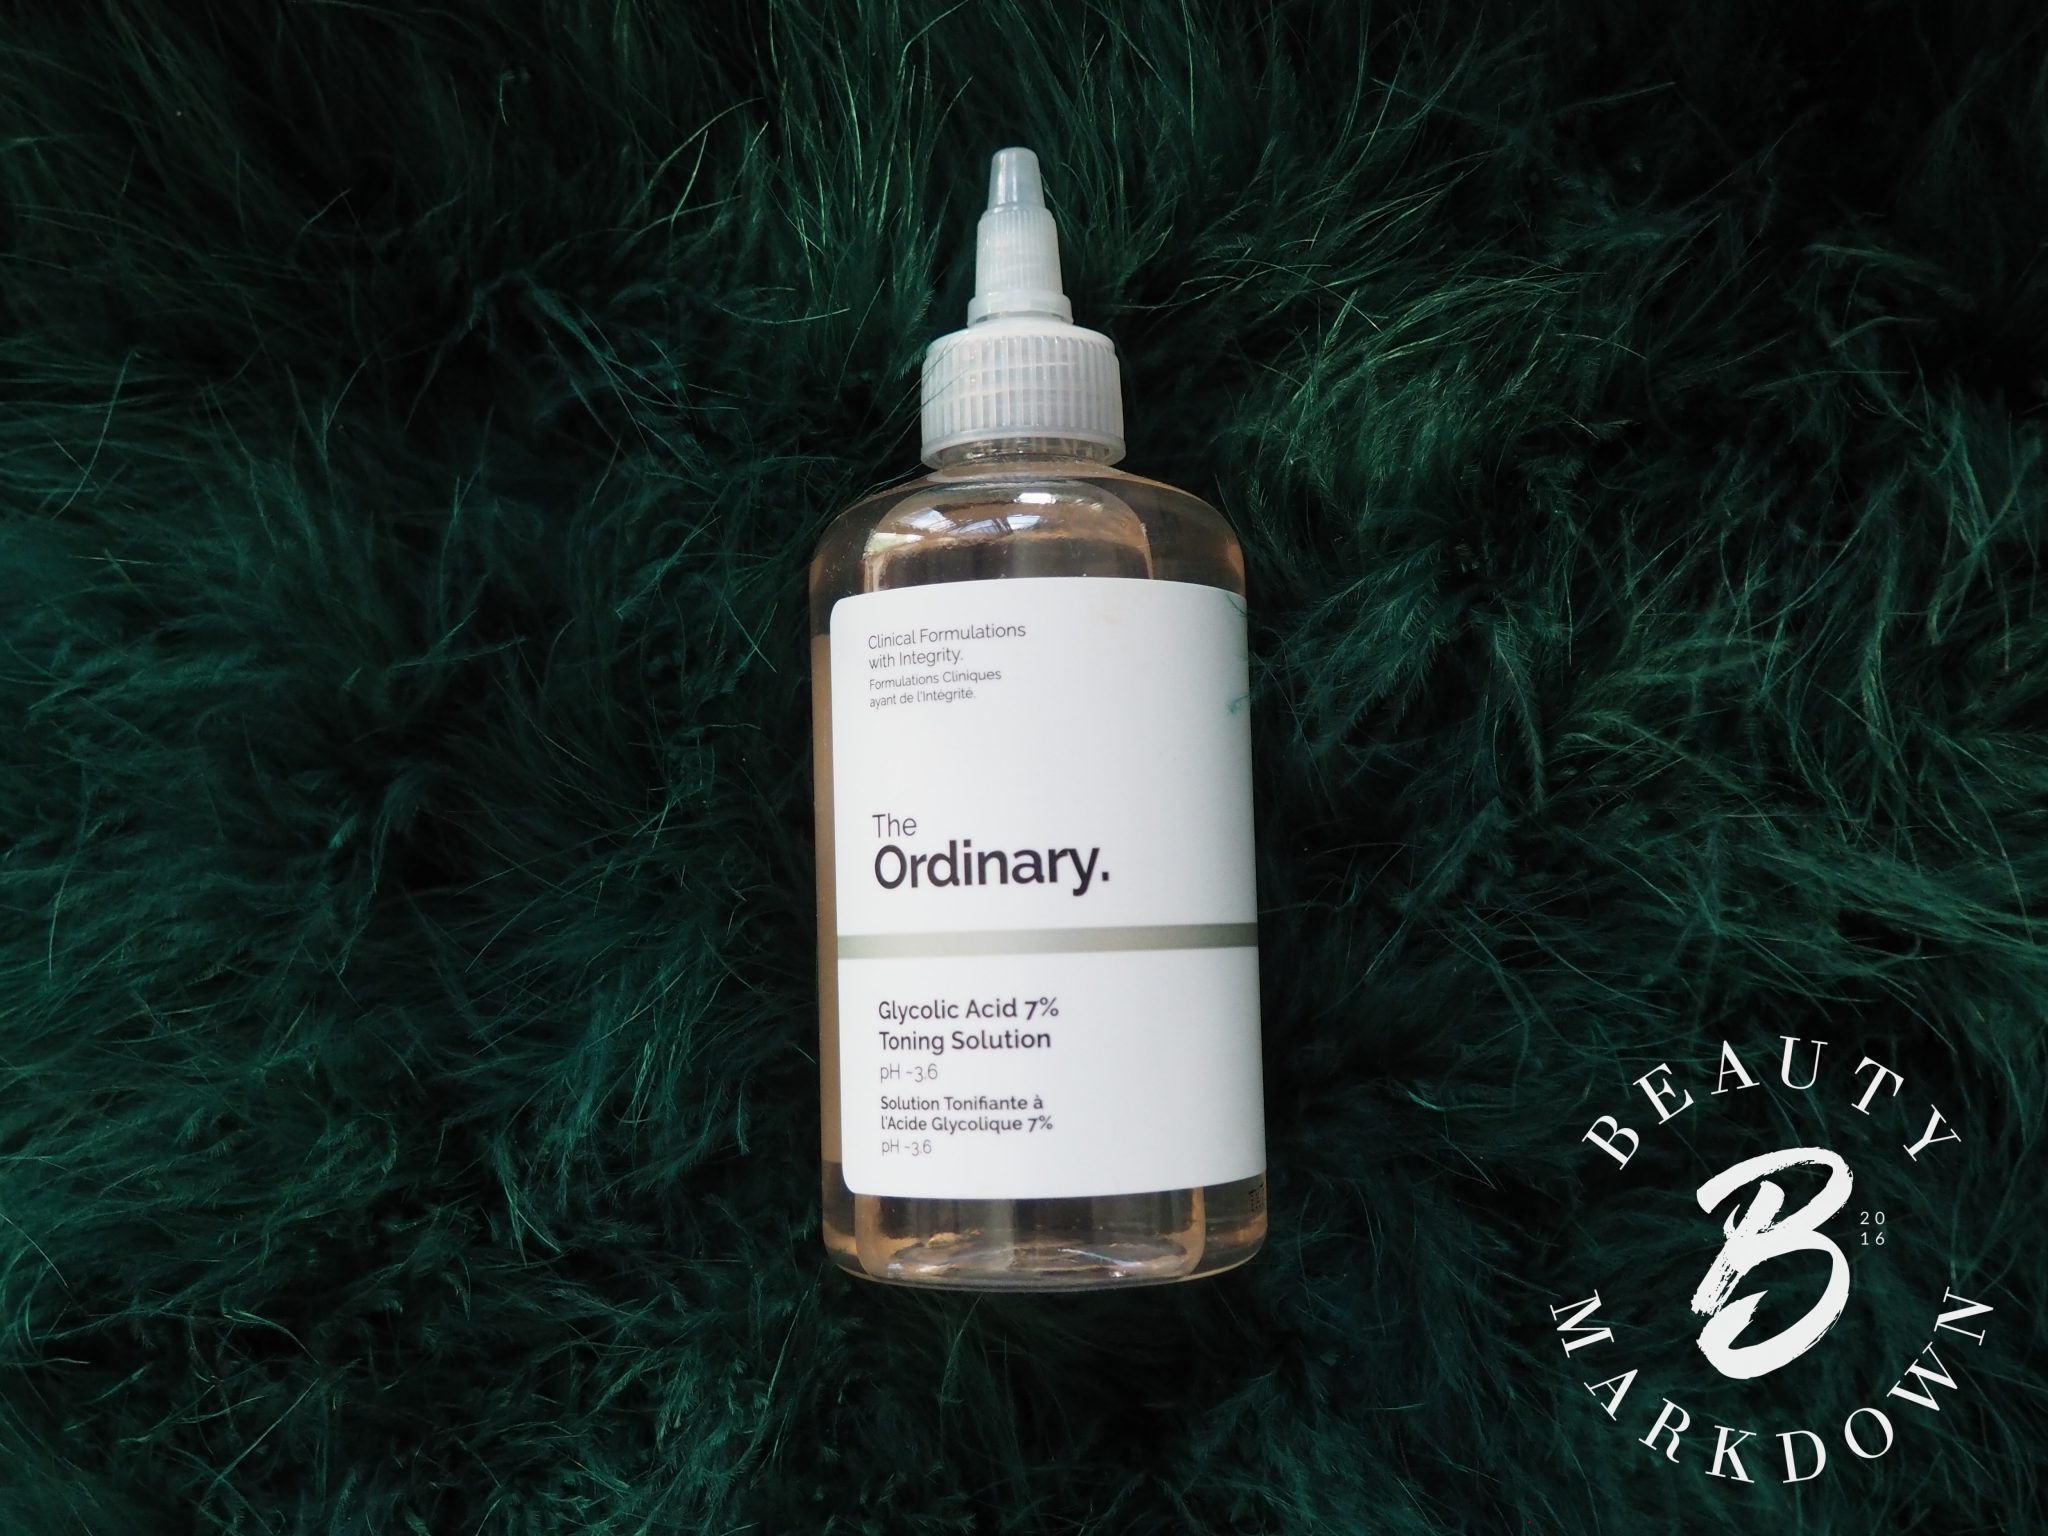 The ordinary toning solution. The ordinary Tonic. Glycolic acid 7% Toning solution. Патч с тоник. The ordinary Tonic solution Glycolic acid.